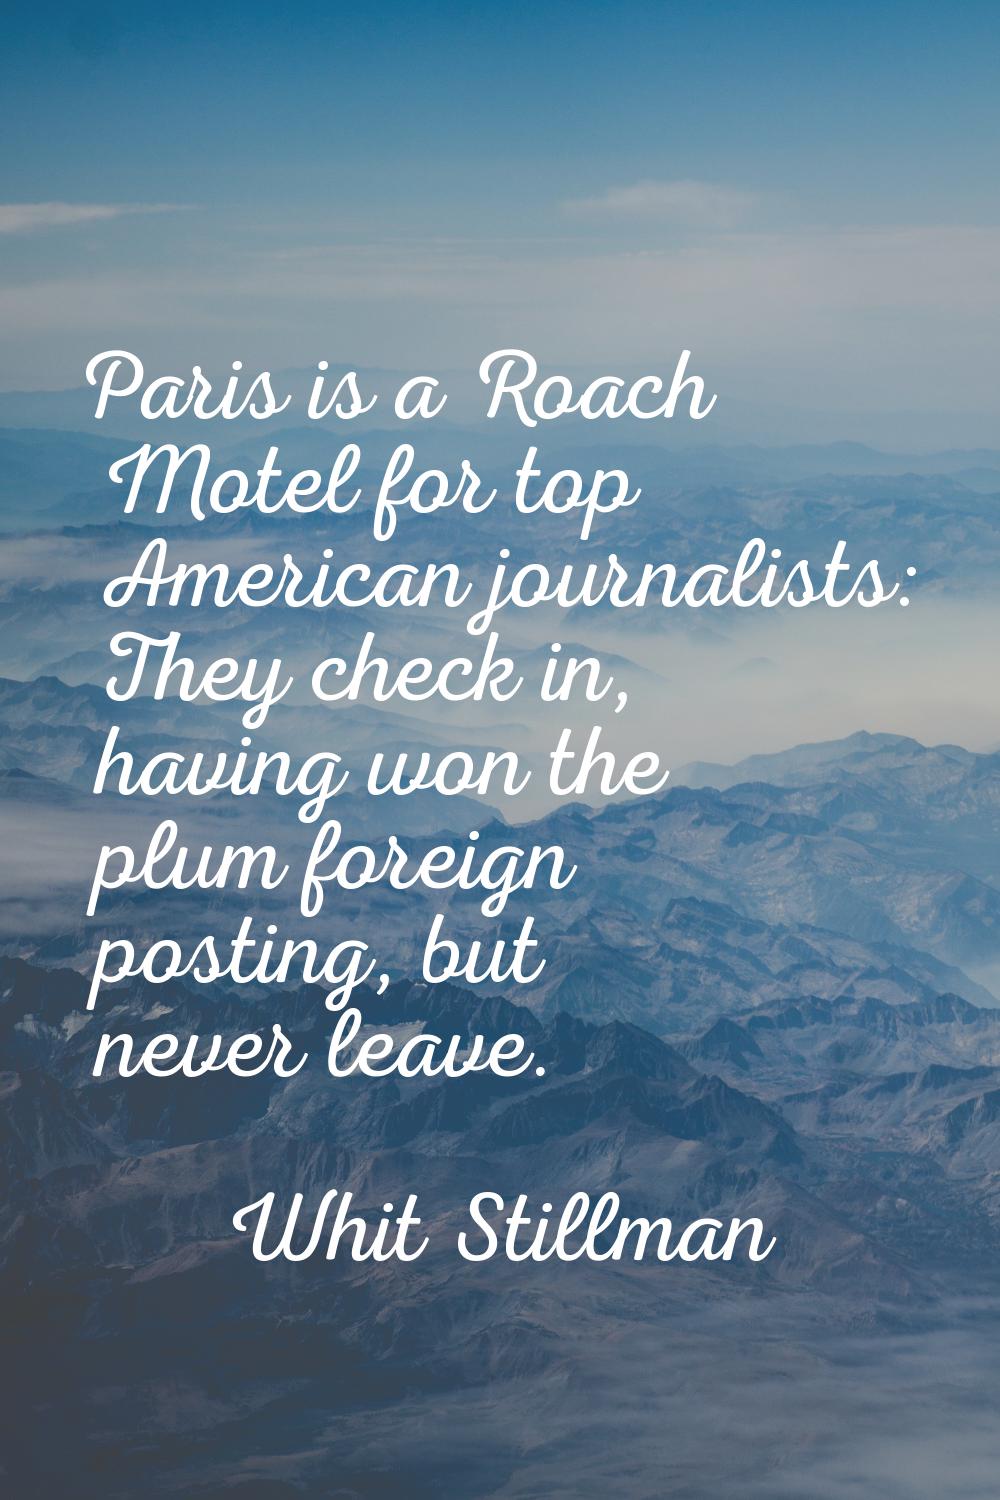 Paris is a Roach Motel for top American journalists: They check in, having won the plum foreign pos